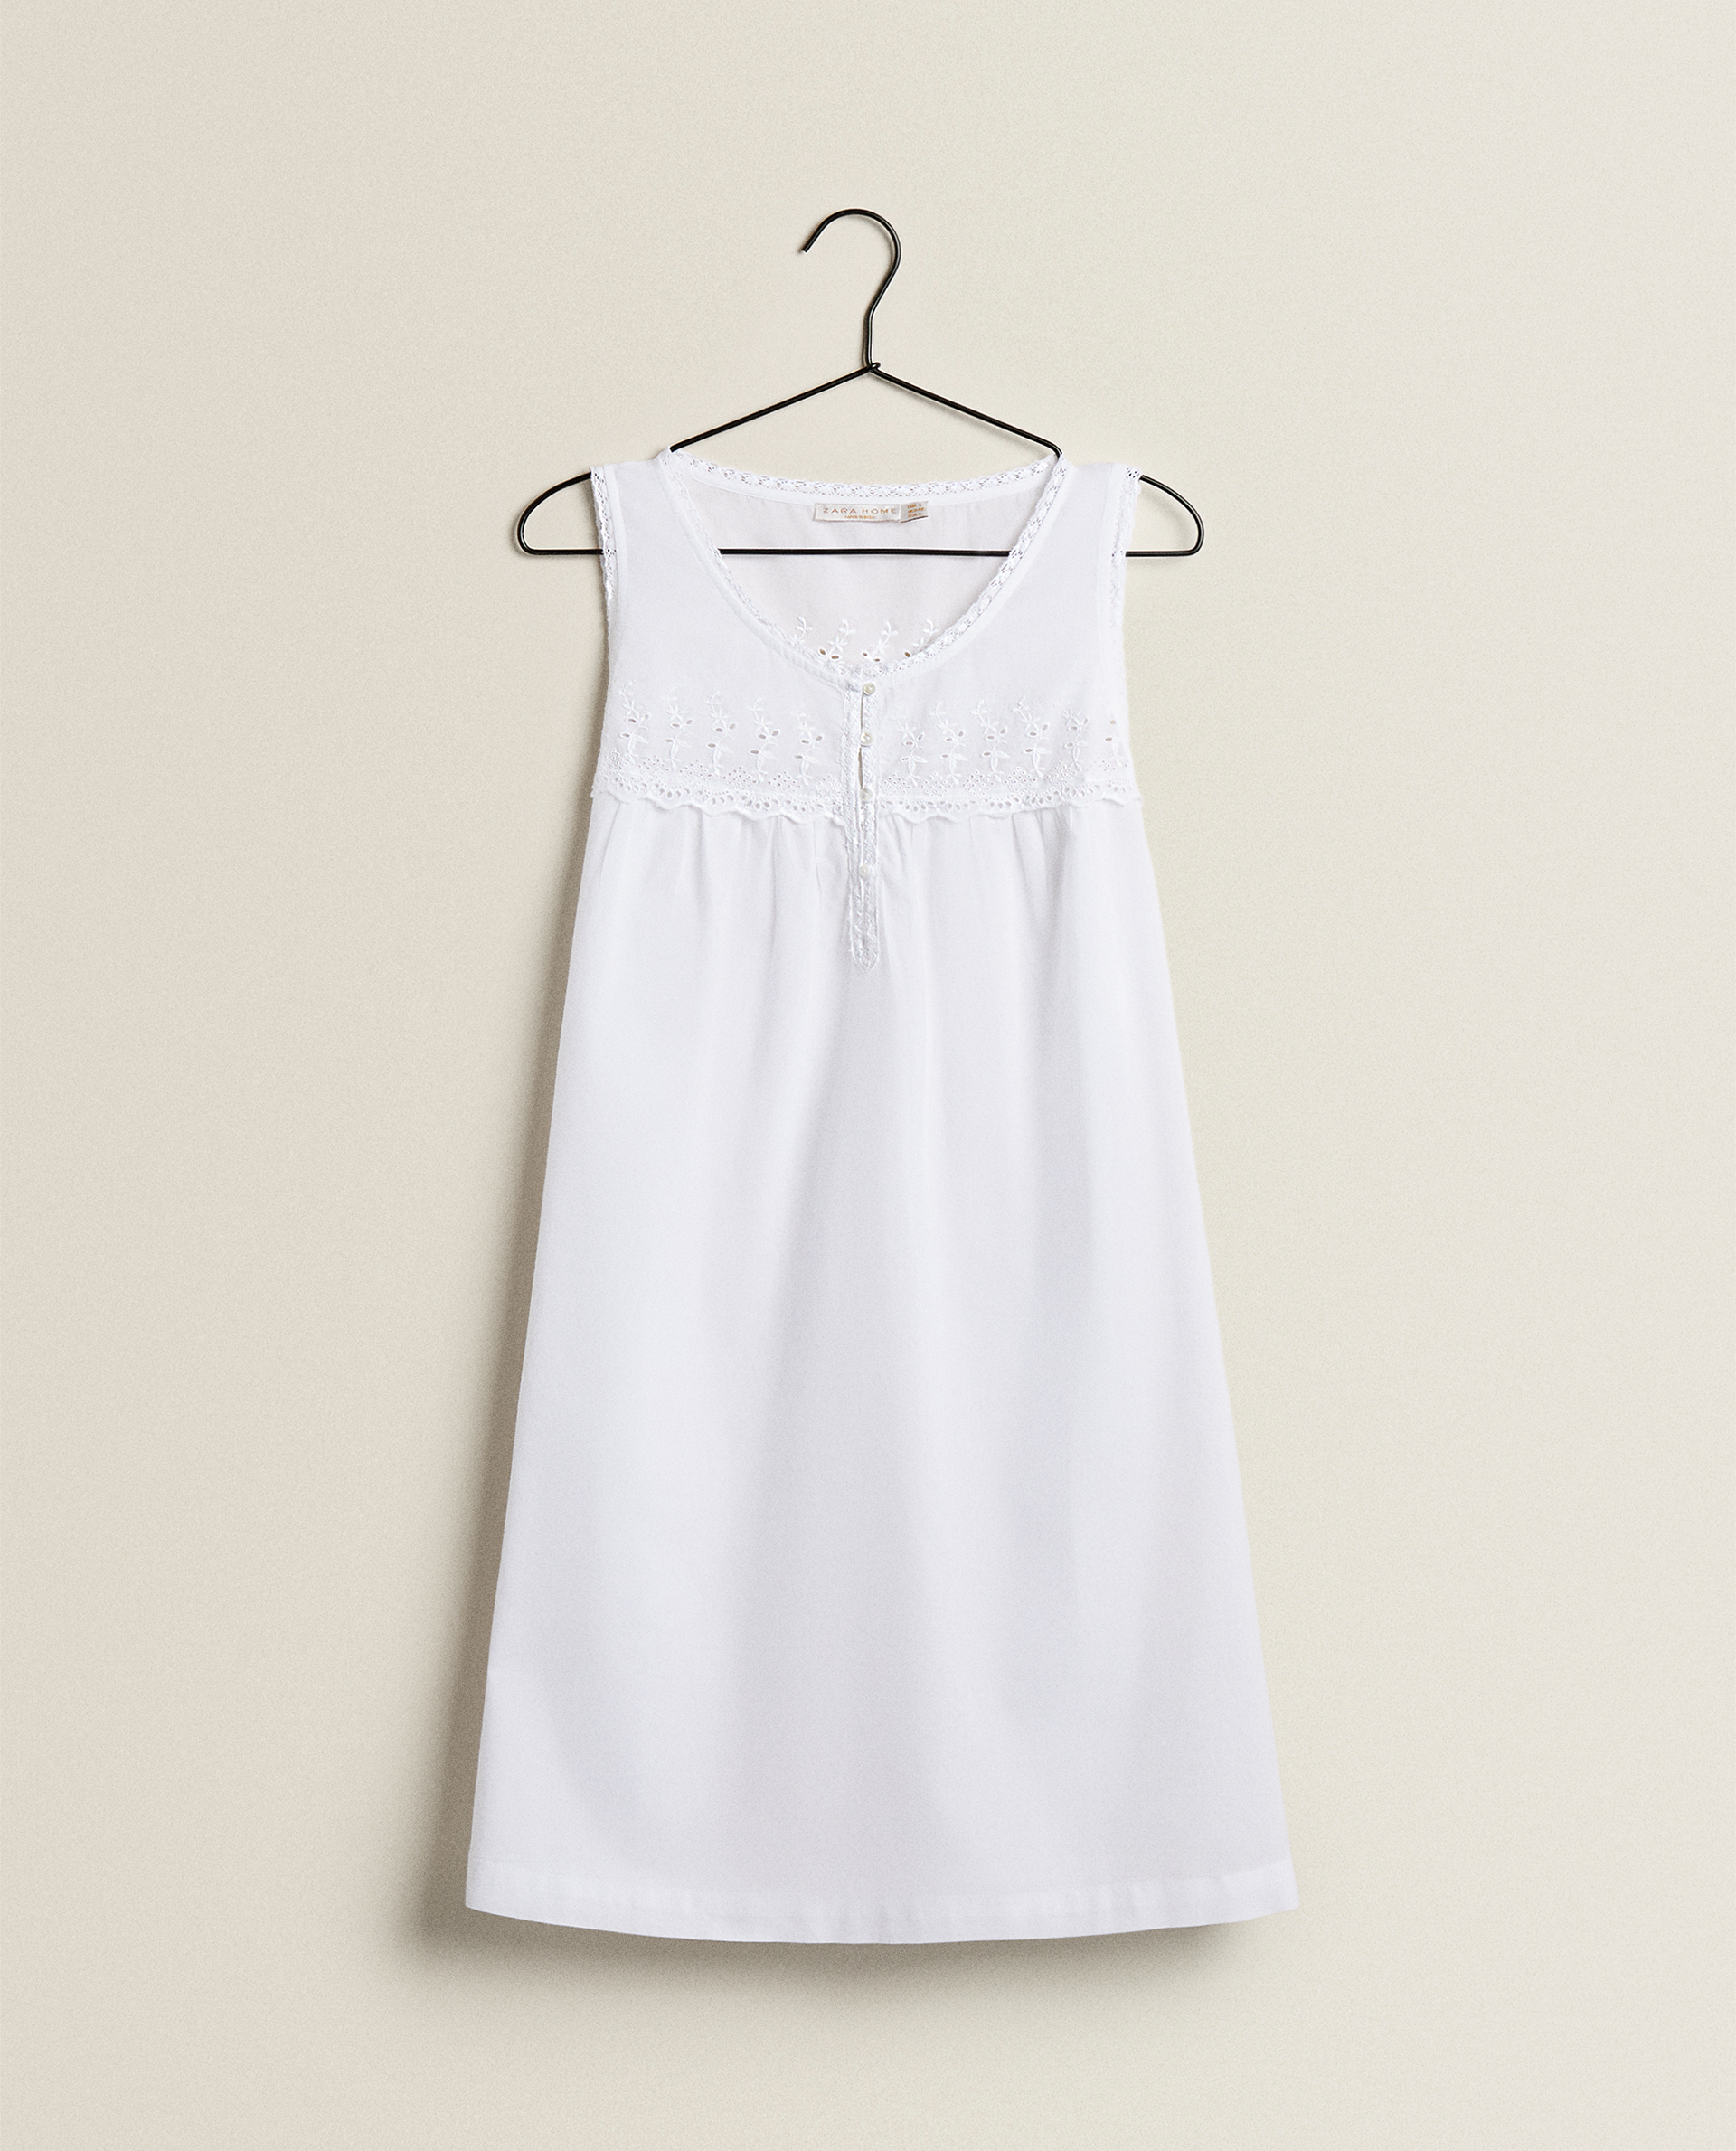 EMBROIDERED COTTON NIGHTGOWN | Zara Home United States of